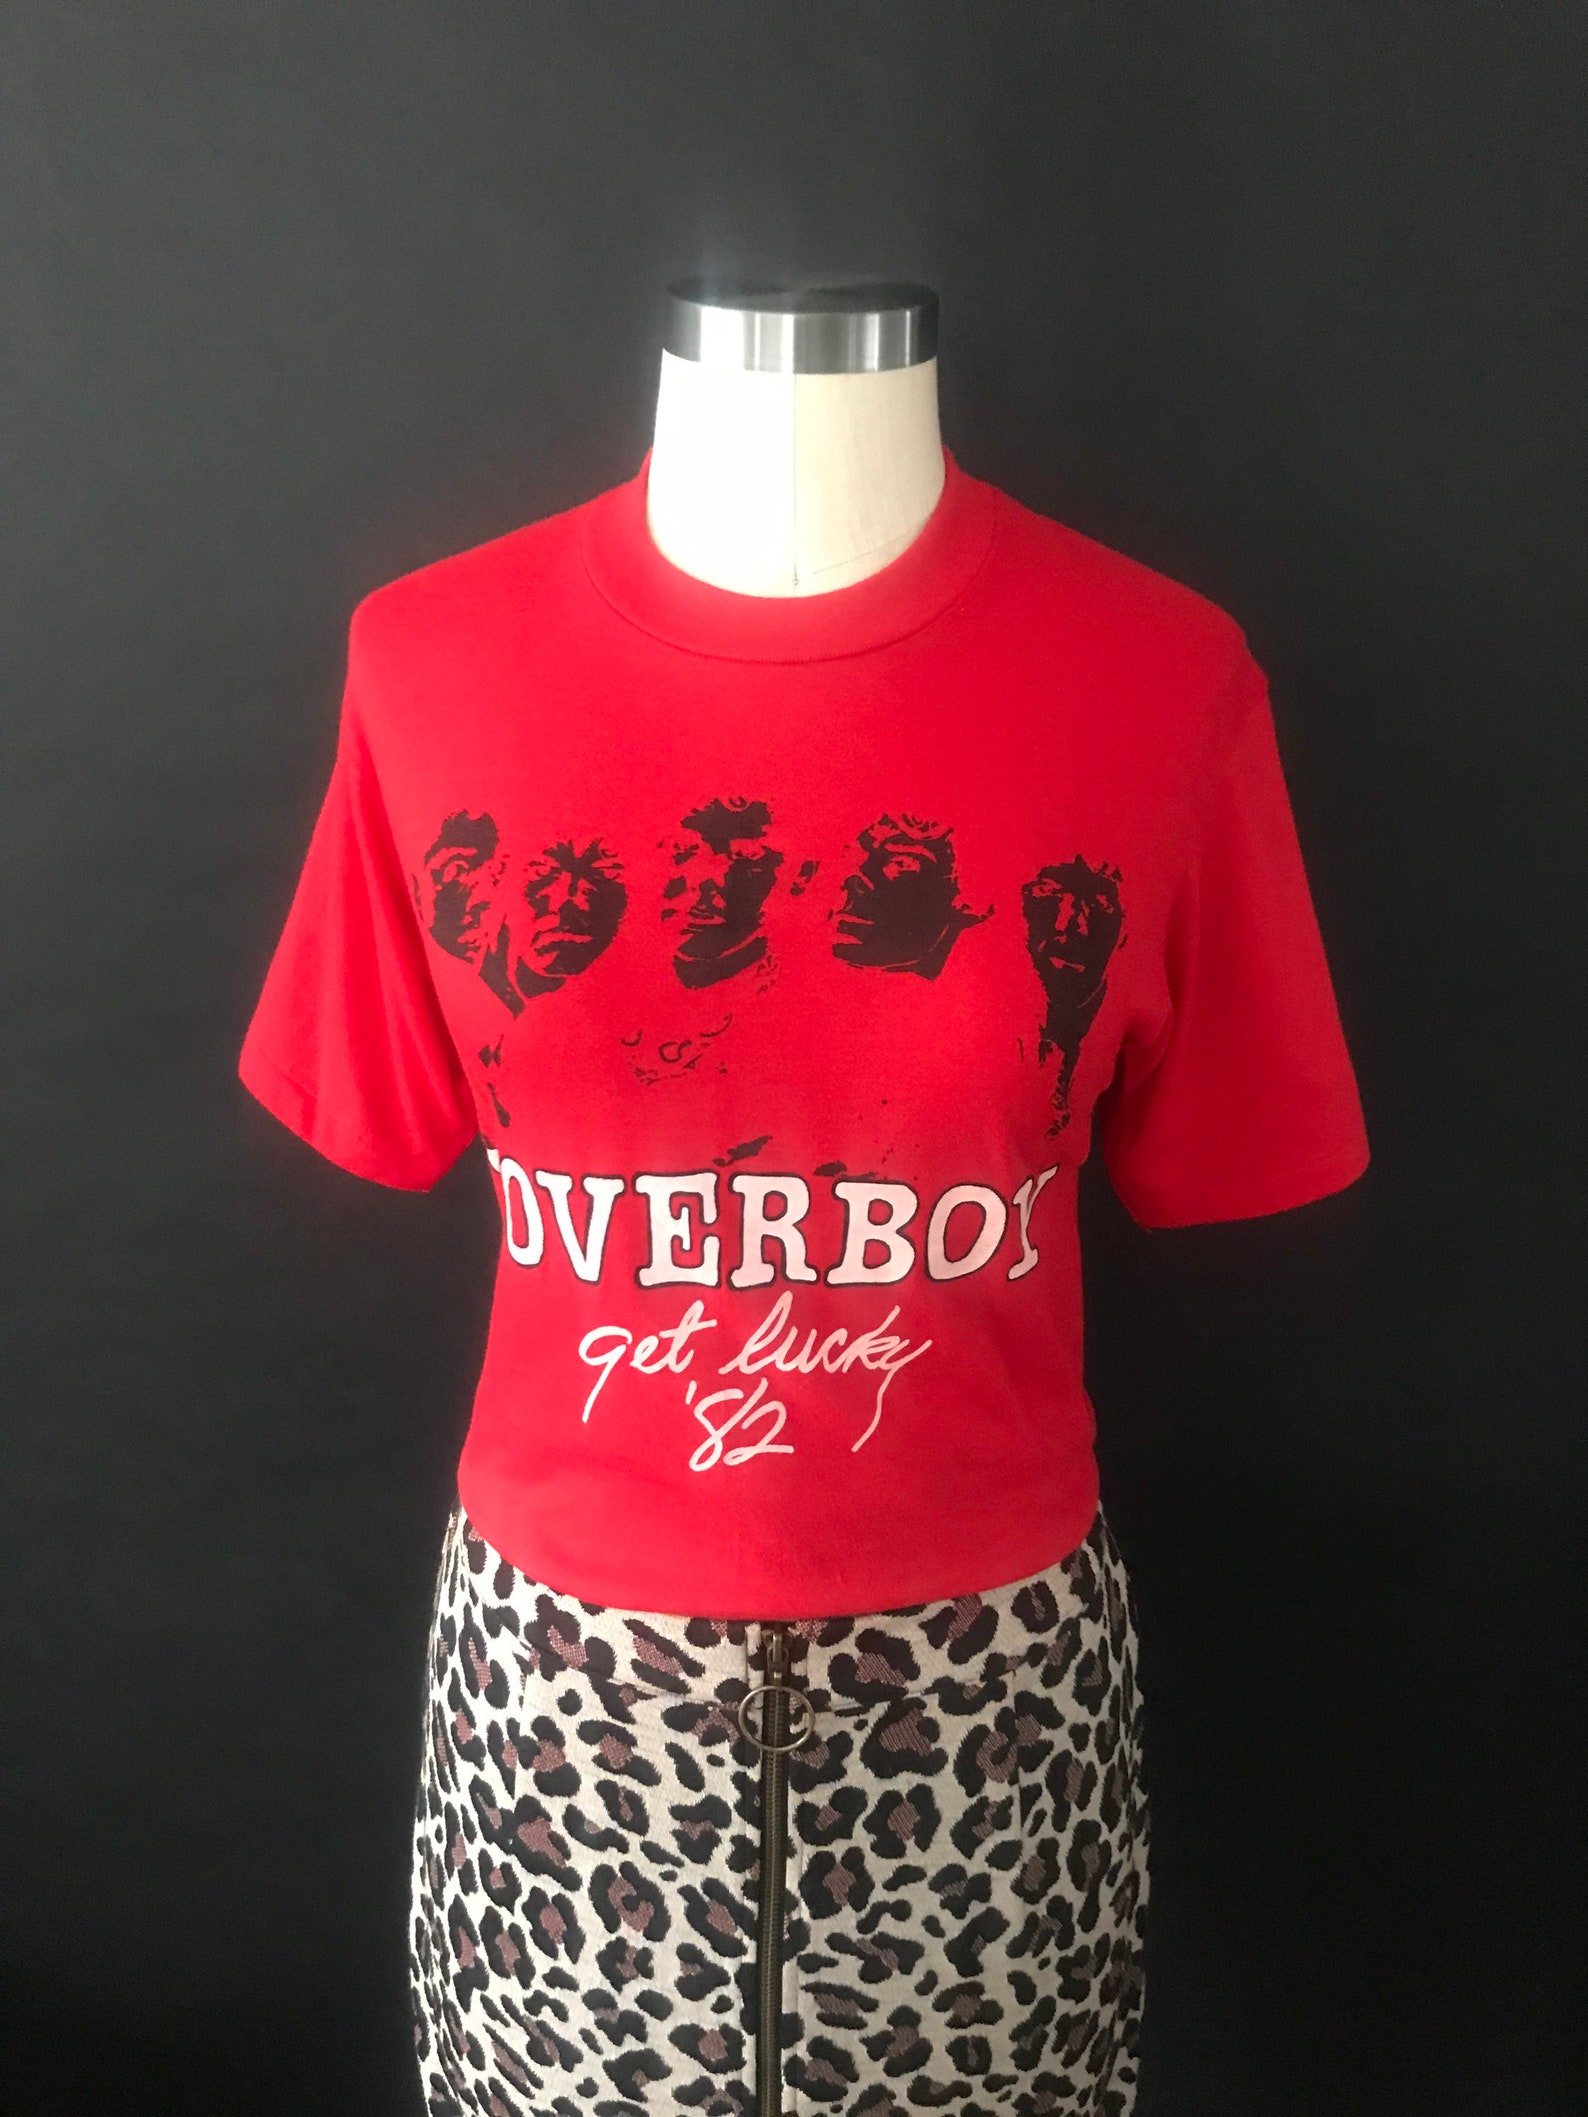 Vintage '82 Loverboy Tour T shirt in great shape Fits | Etsy